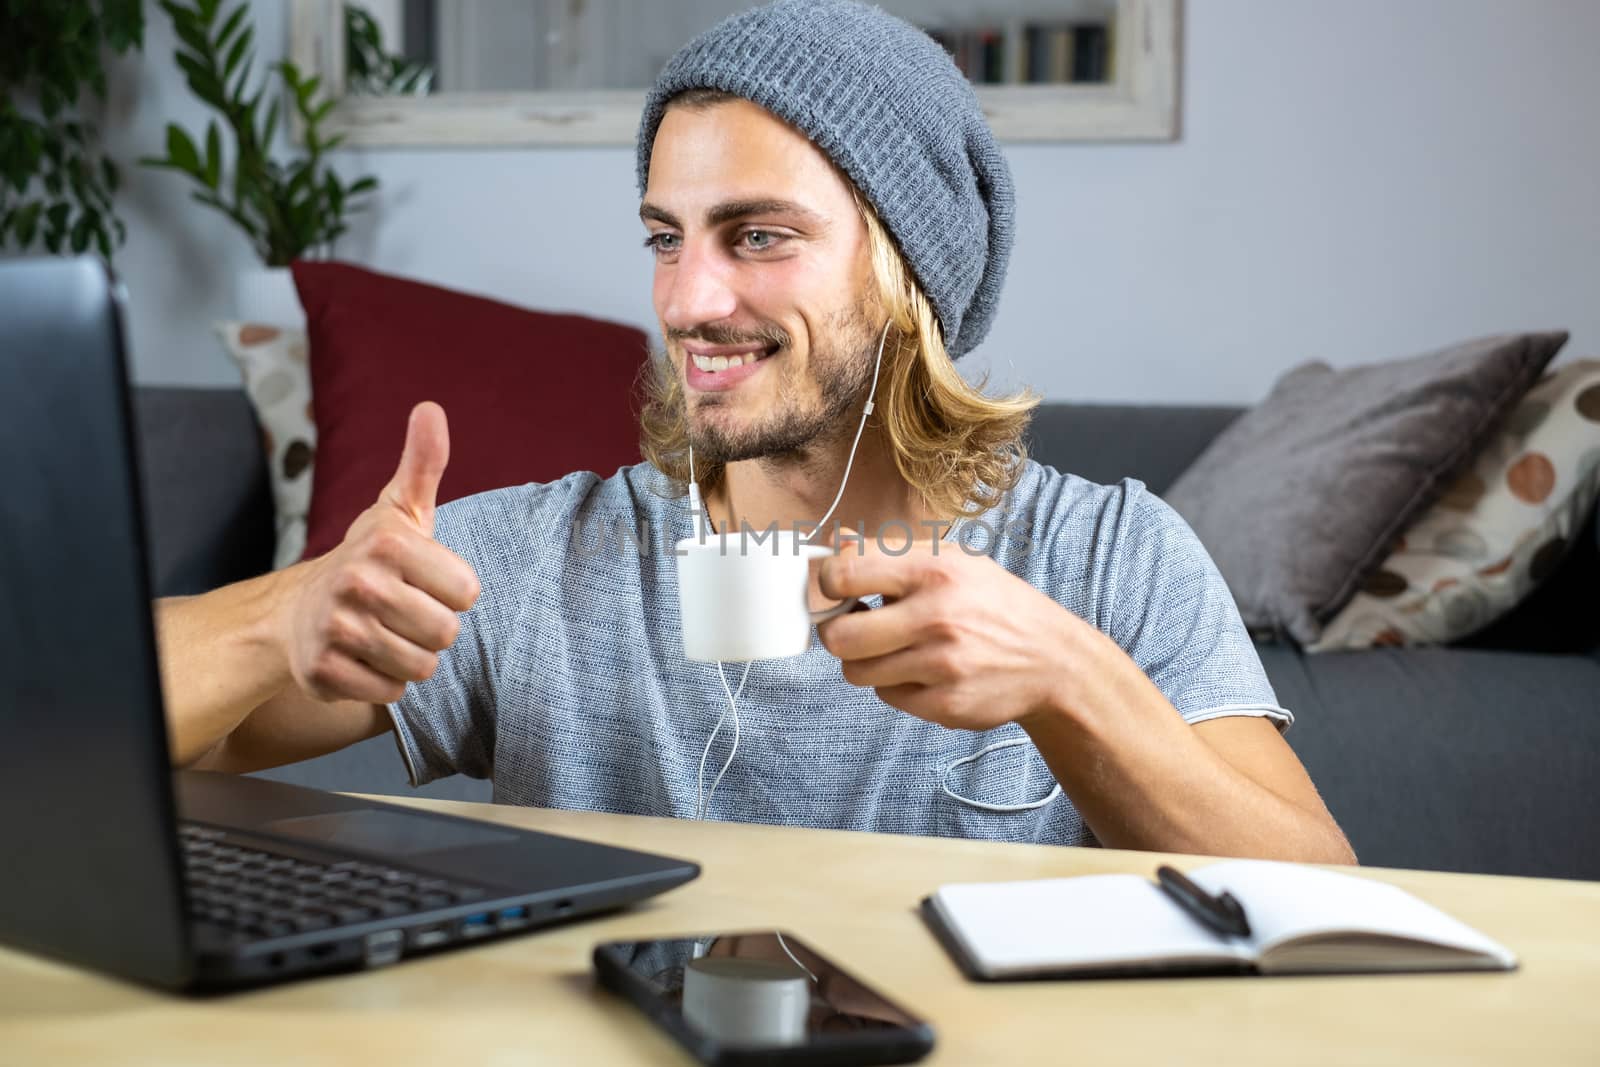 Handsome young caucasian man using computer working at home and talking with mobile feeling happy with smile showing teeth with thumbs up